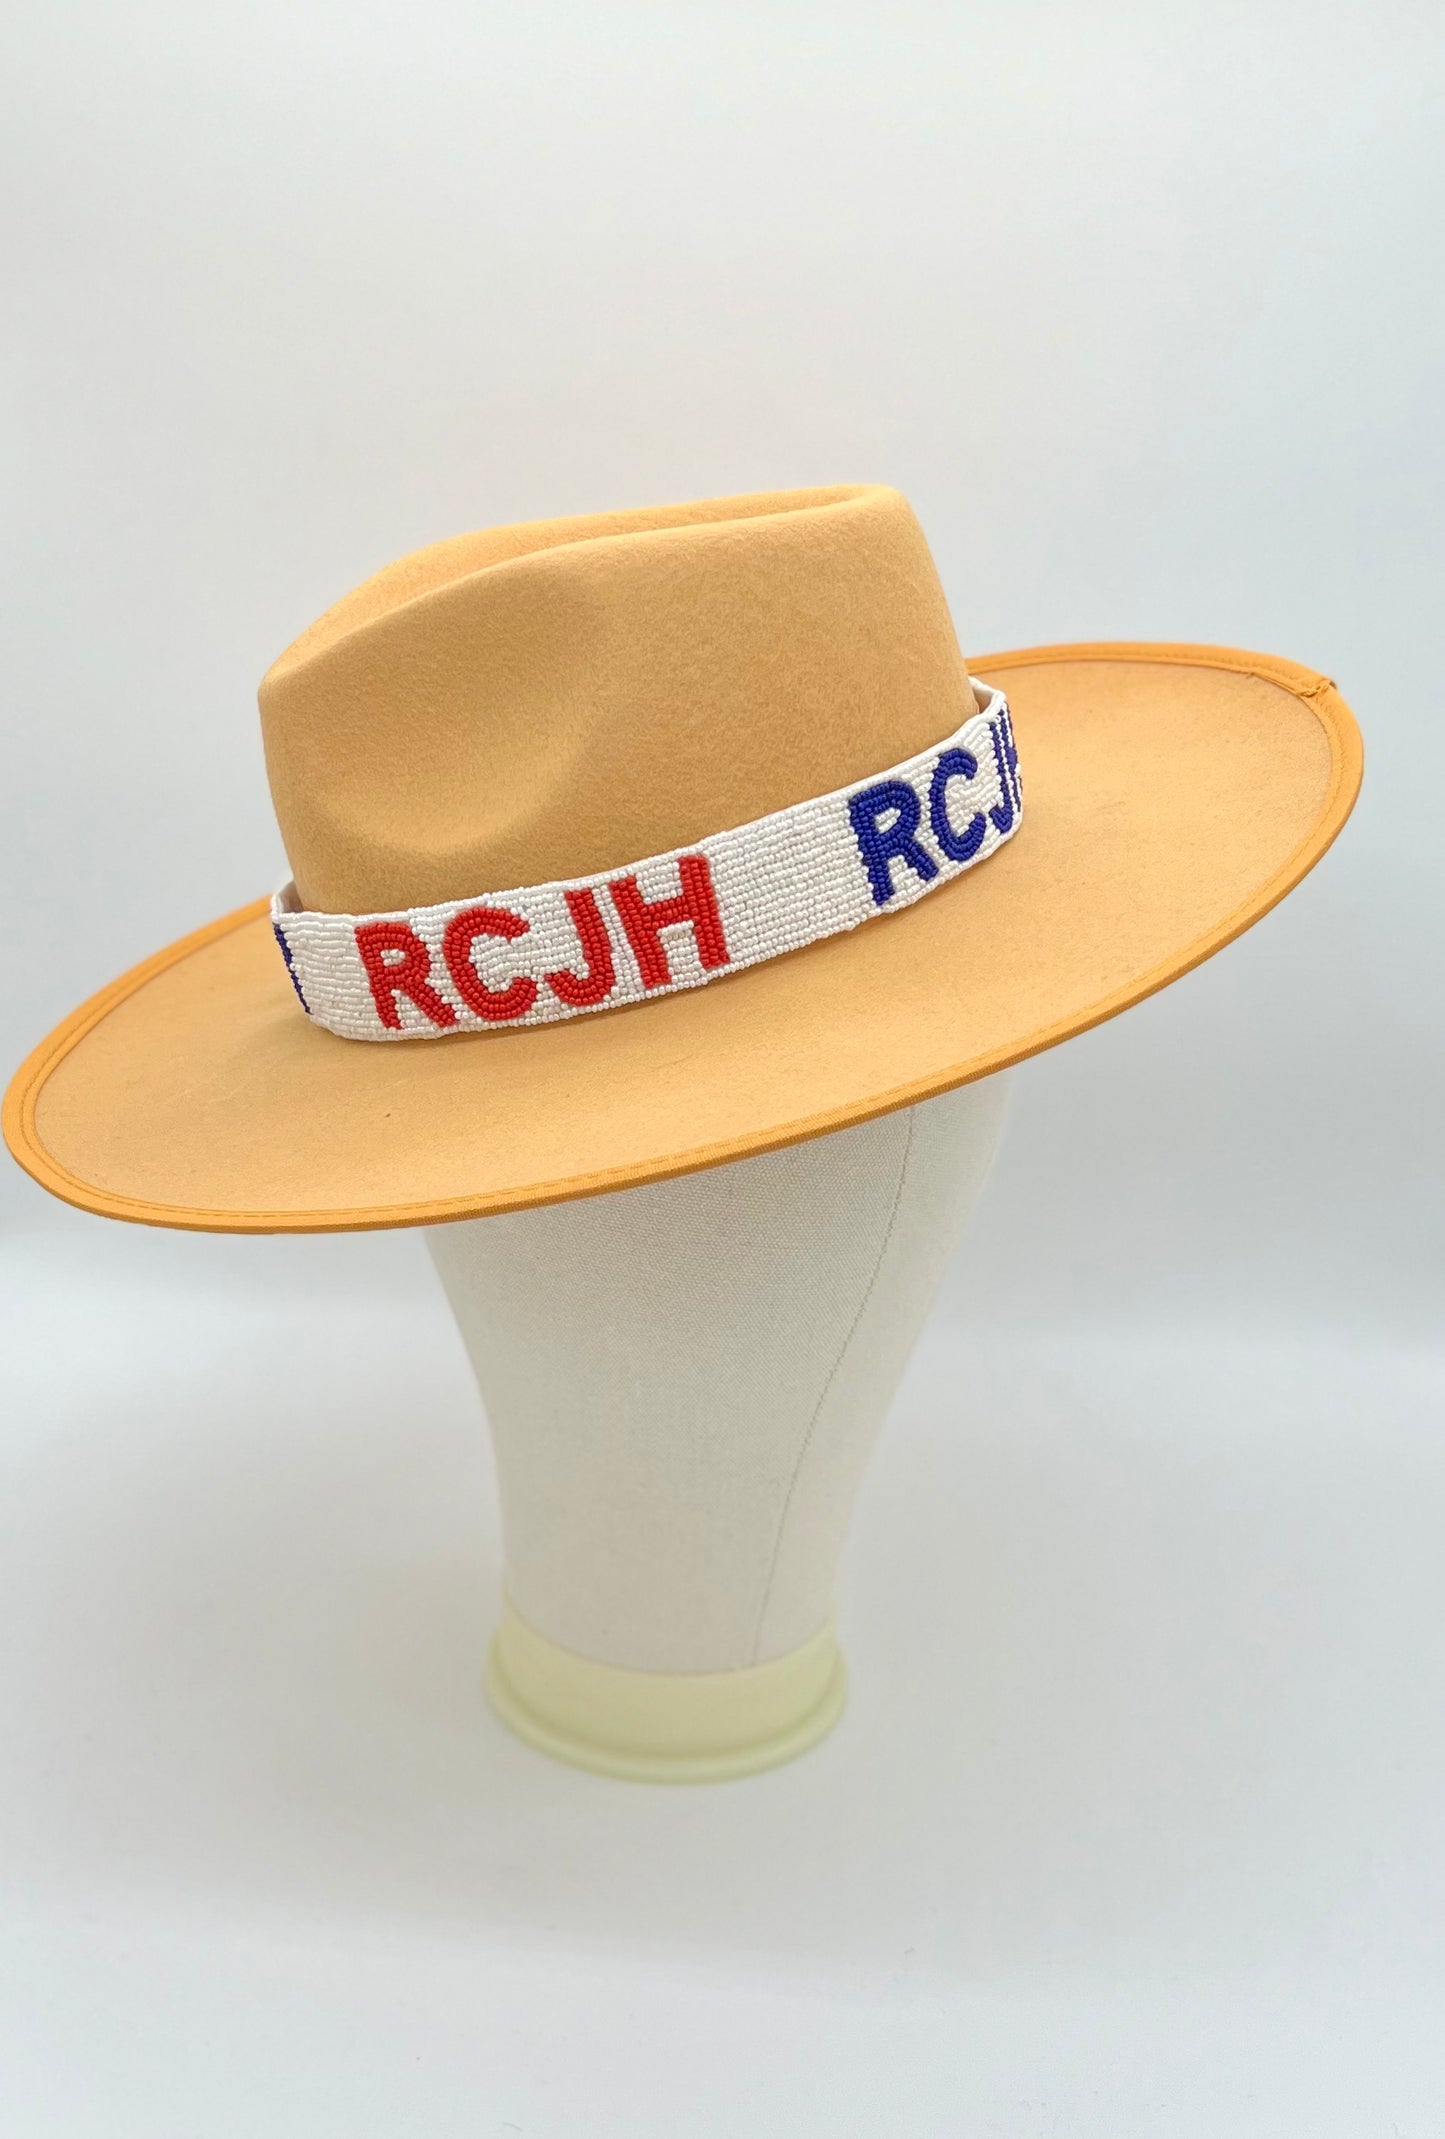 RCJH beaded hat band